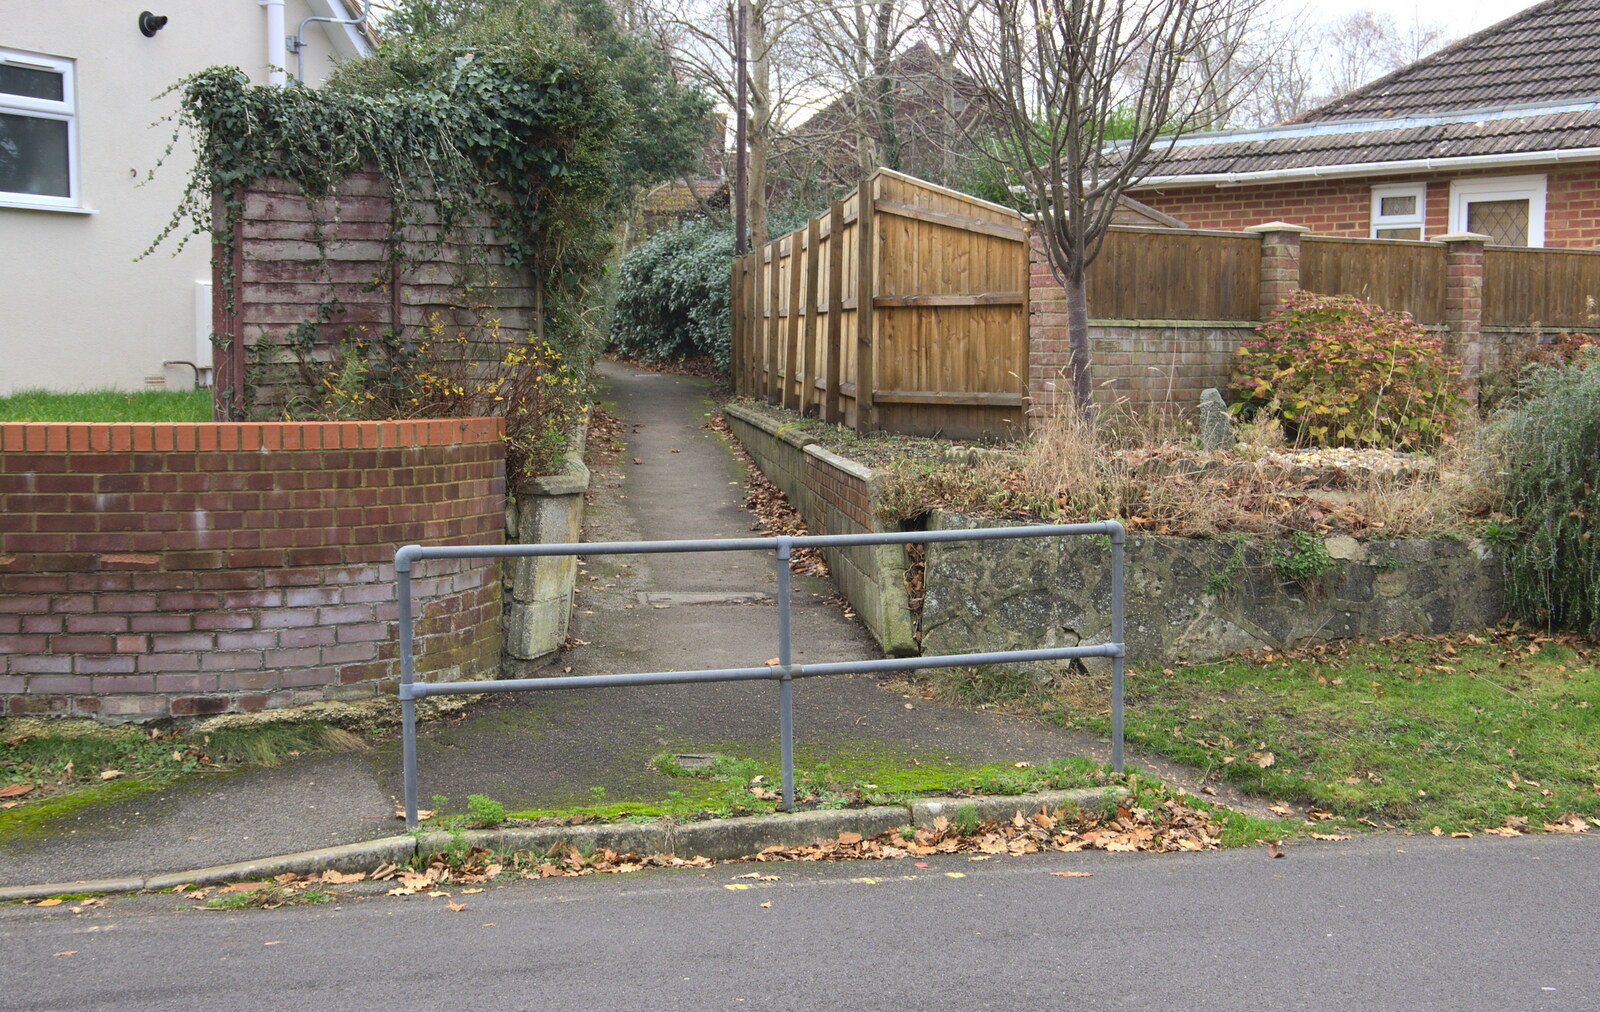 A barrier in front of a footpath from Thanksgiving in Highcliffe, Dorset - 23rd November 2018